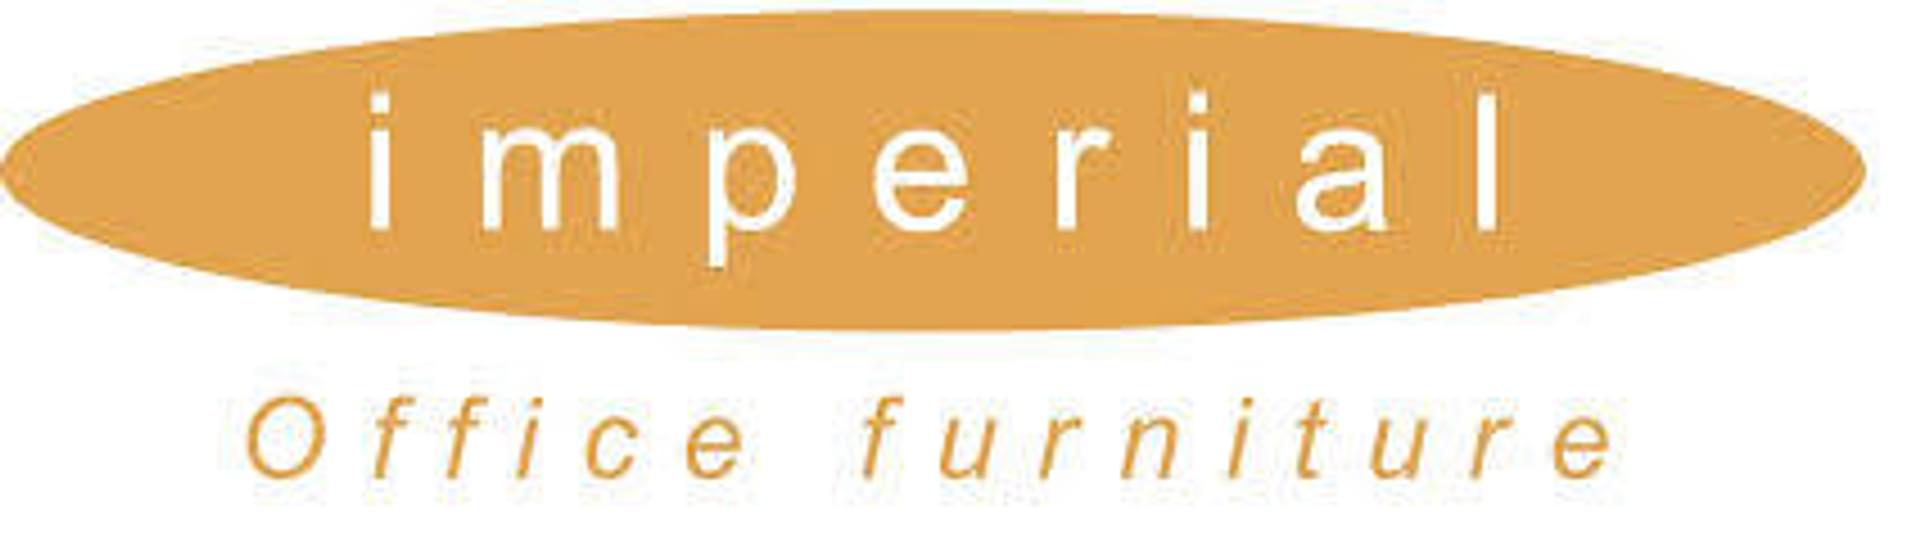 Imperial office furniture logo